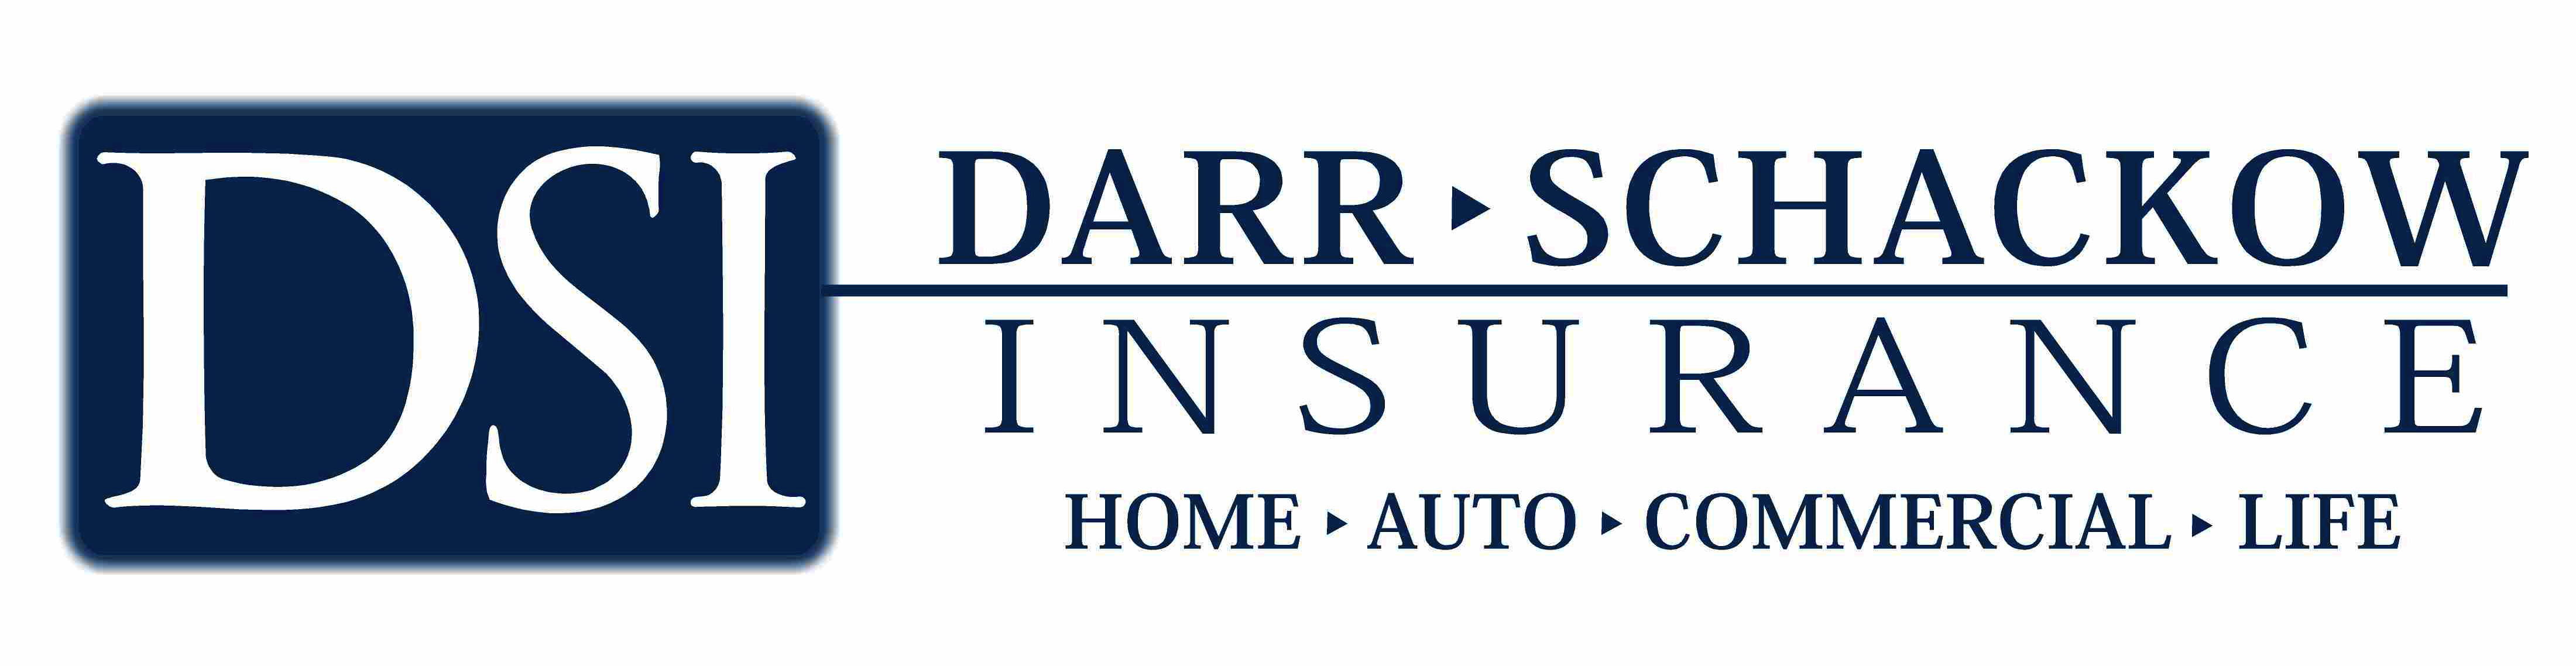 Darr Schackow Insurance Agency Locations And Driving Directions